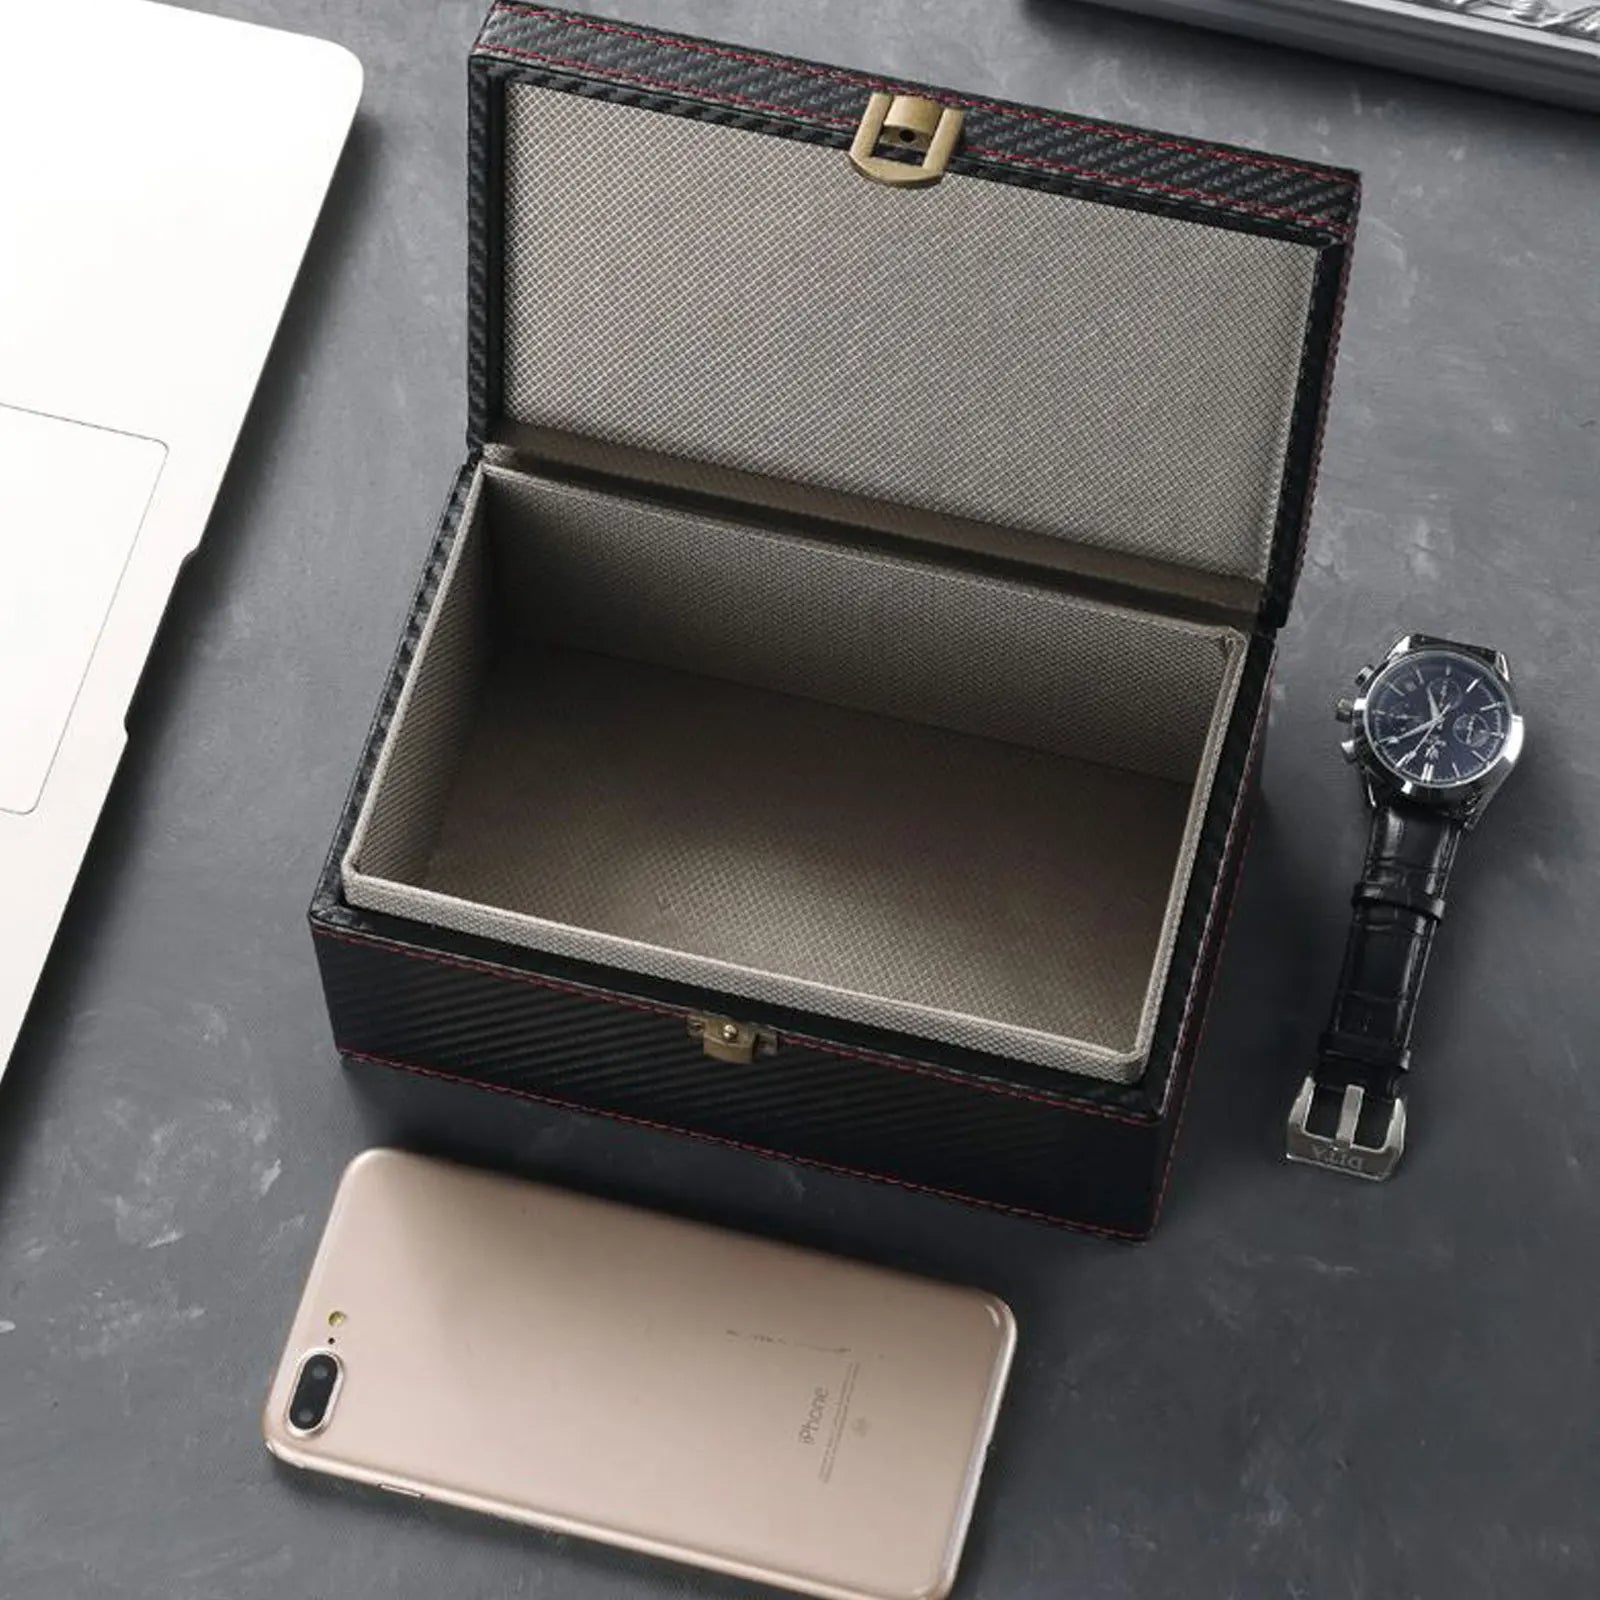 TimelyTrust Luxury Faraday Box & Pouch Set: Ultimate Car Key and RFID Security